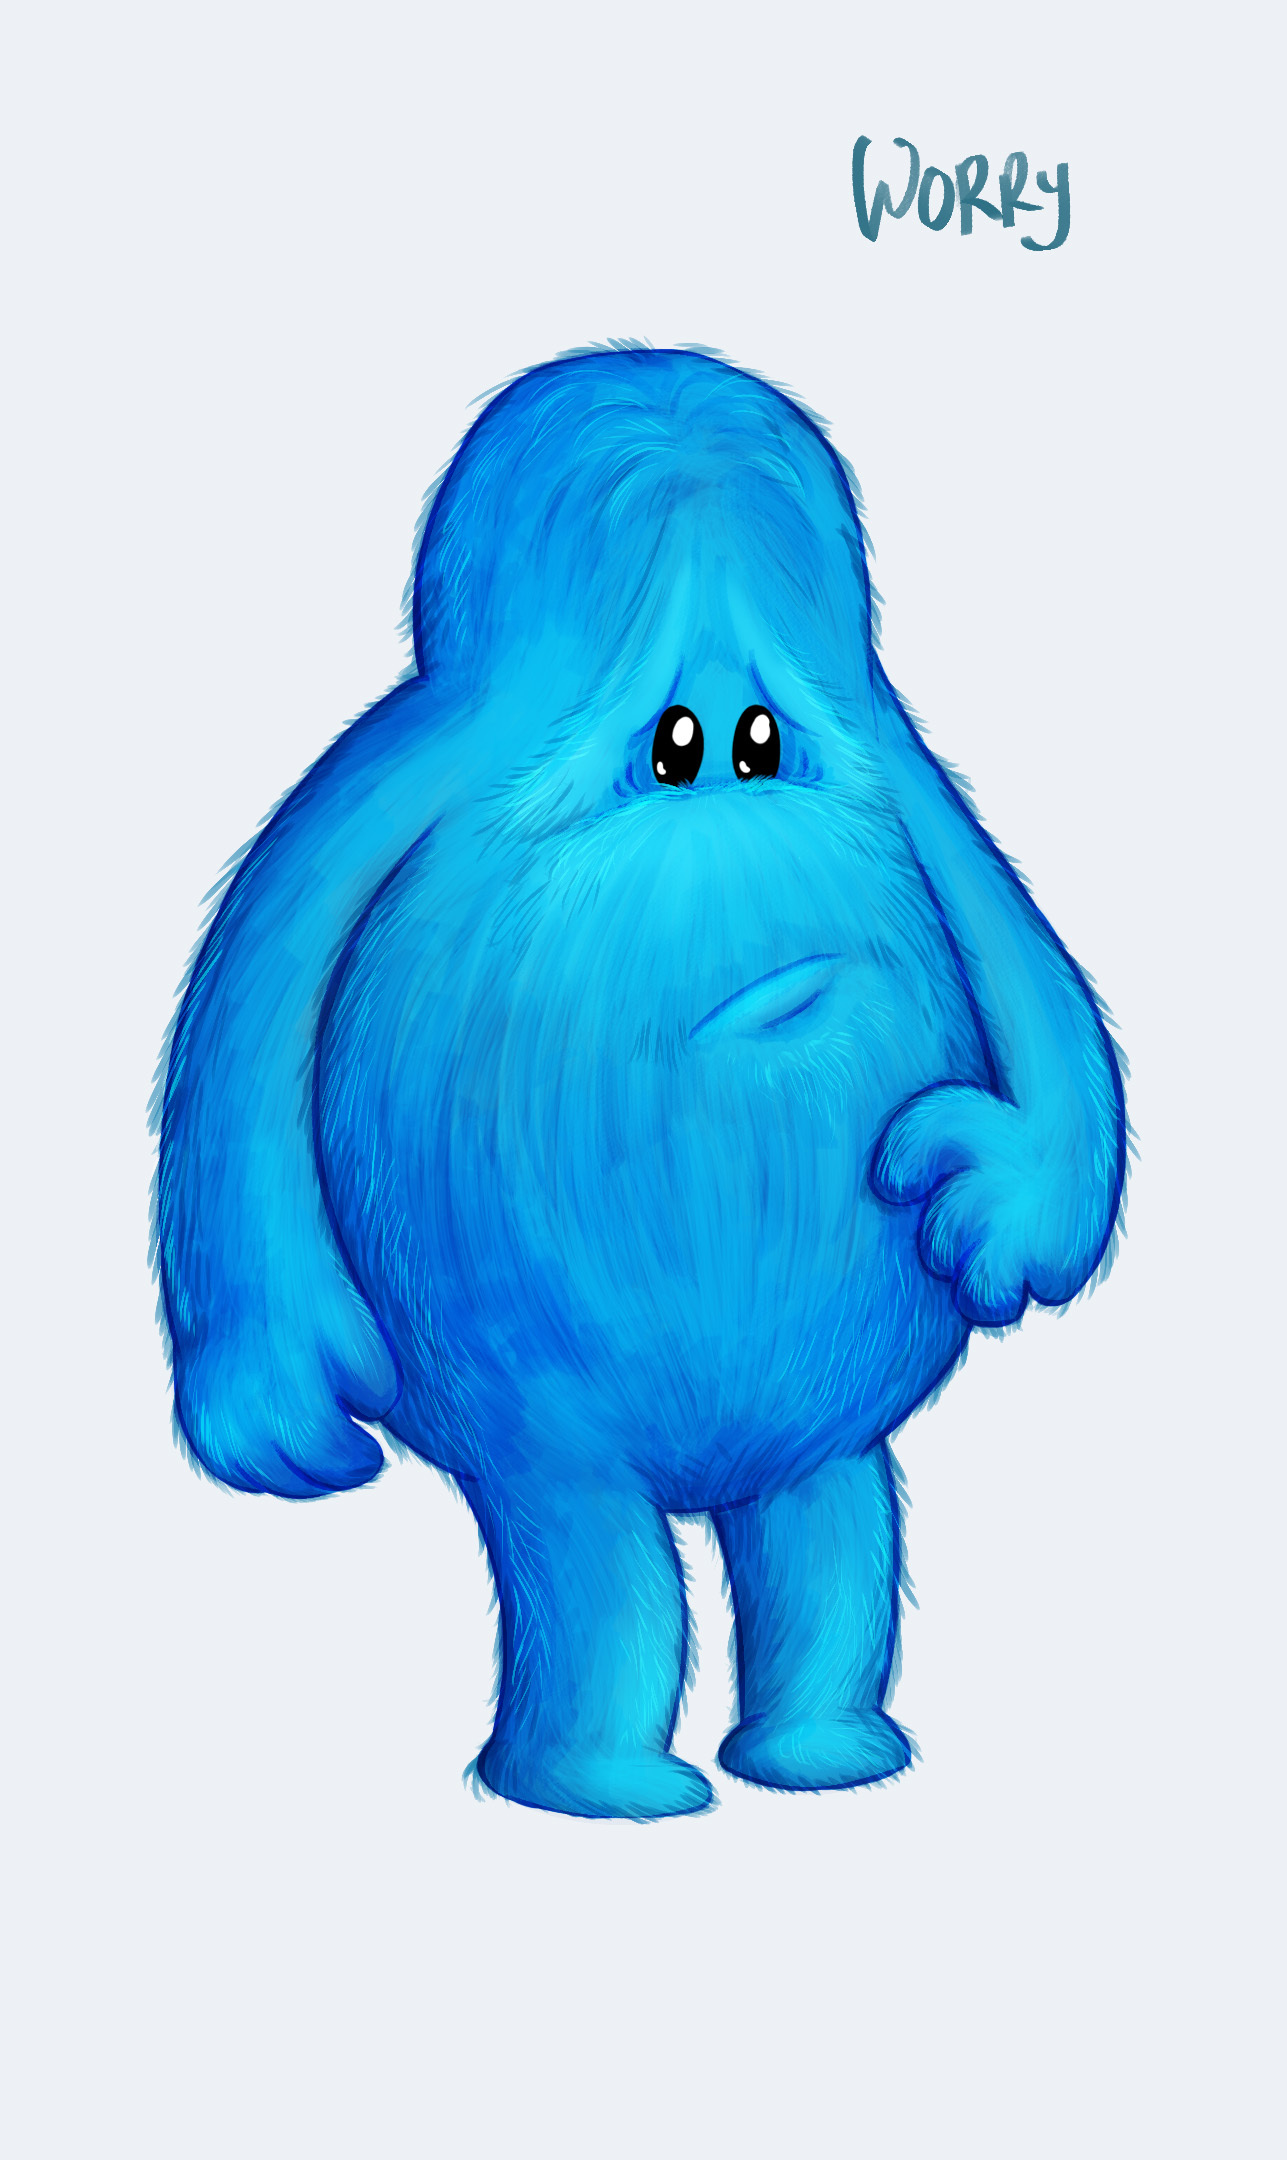 Digital concept of blue character